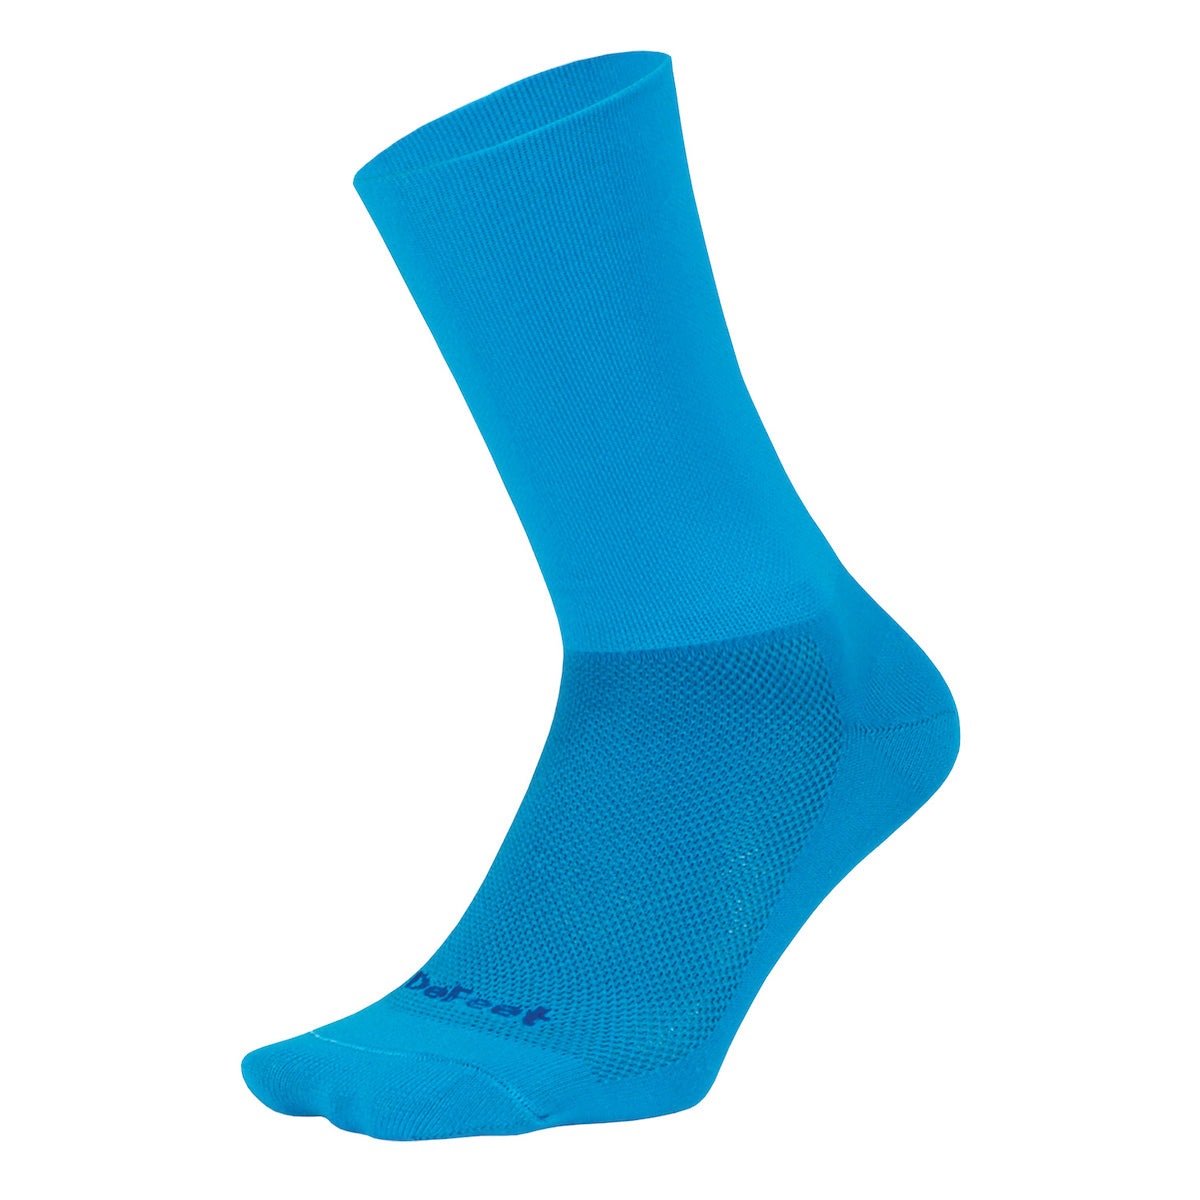 DeFeet Aireator 6" D-Logo cycling sock with 6" double cuff in bright blue